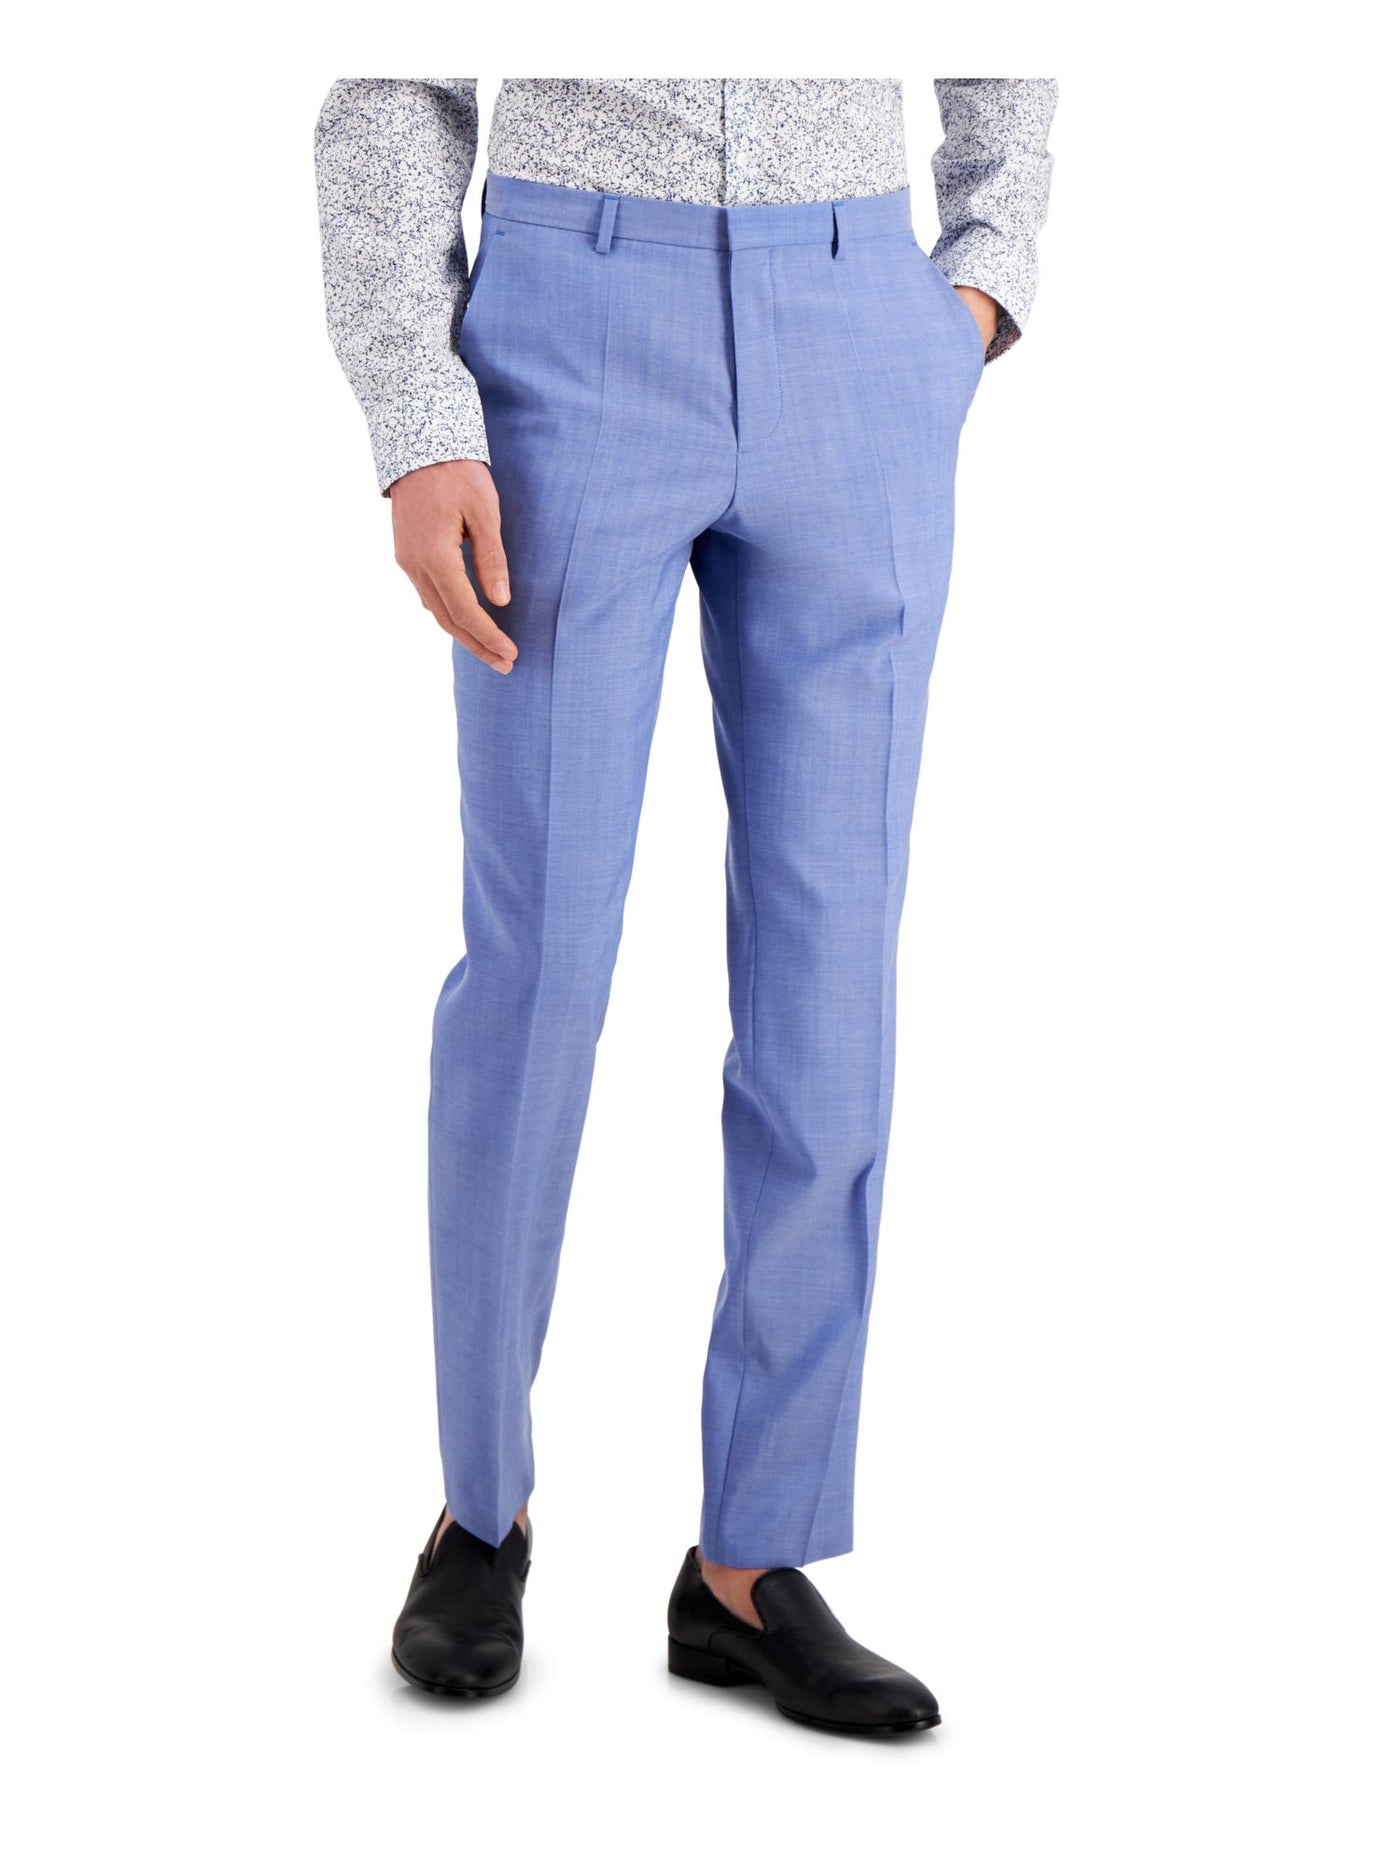 HUGO BOSS Mens Boss N Red Label Blue Flat Front, Tapered, Pants 40R